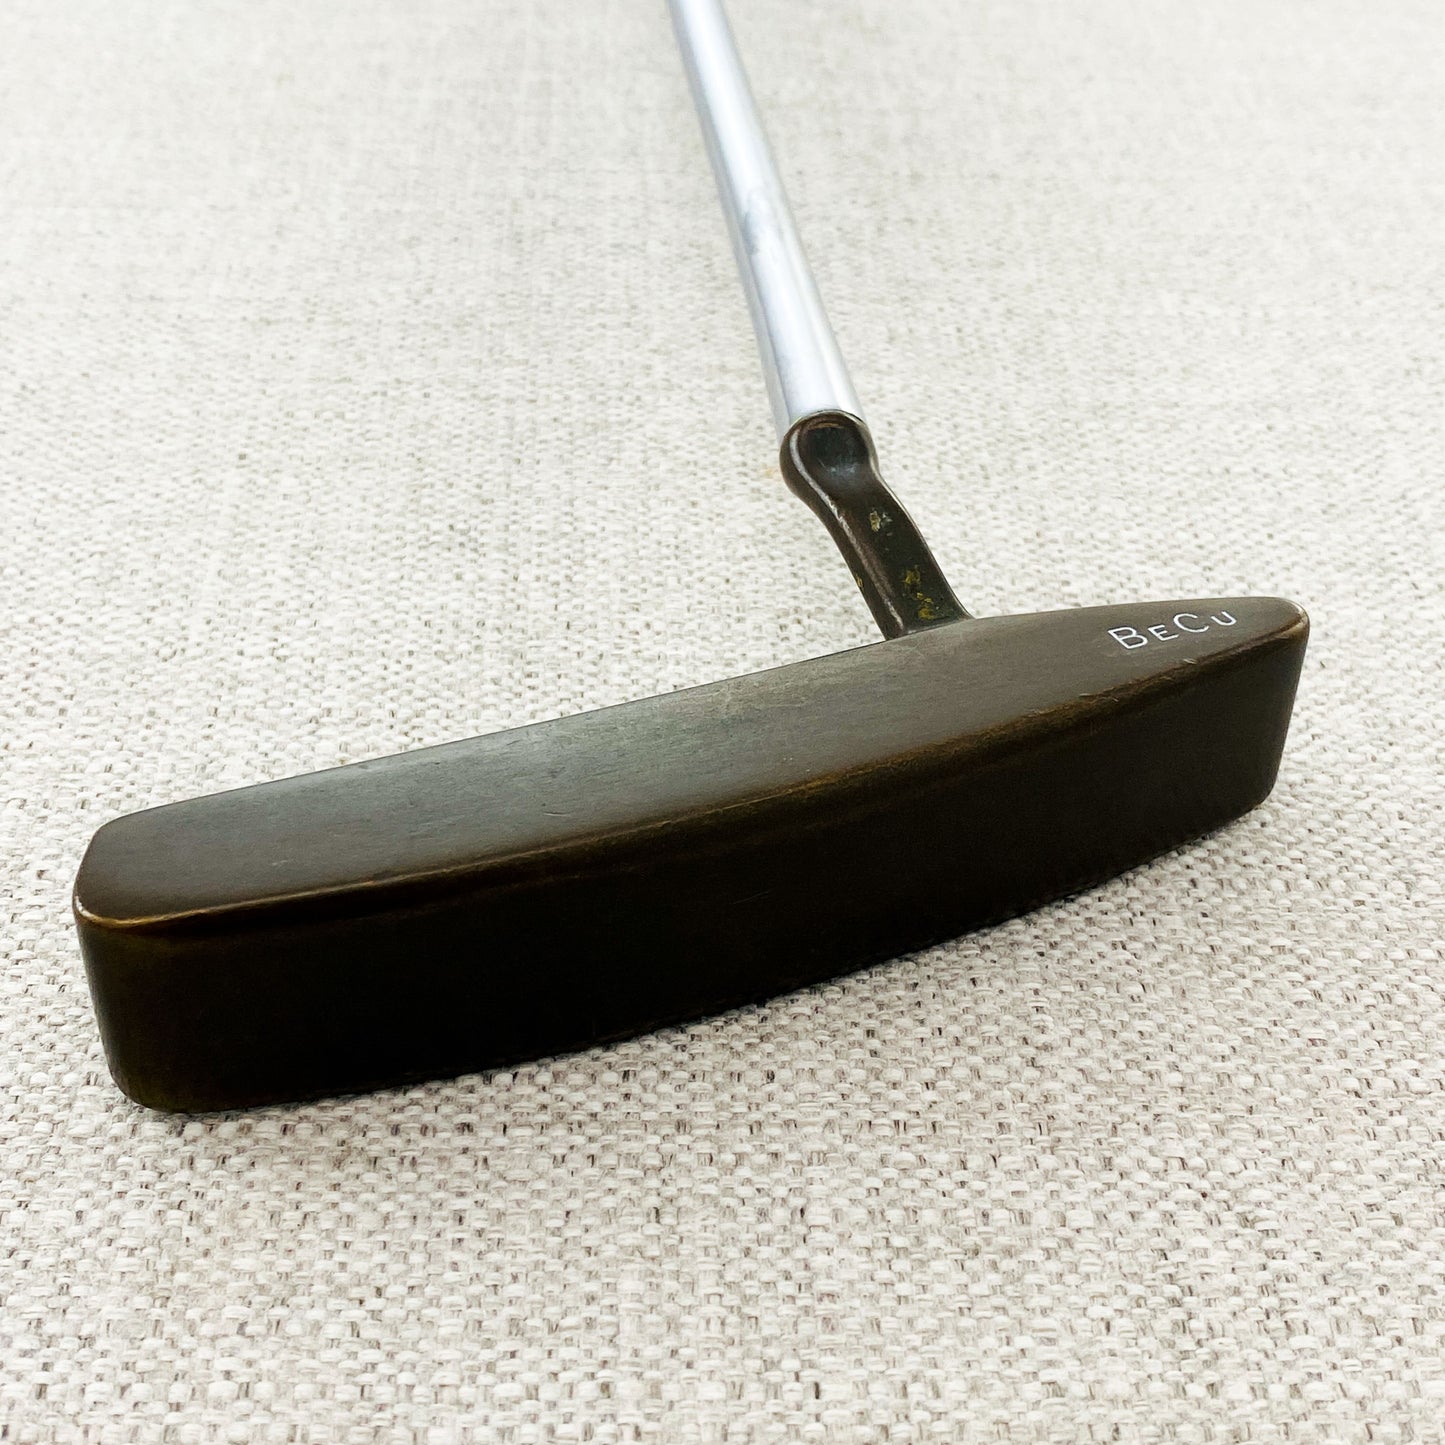 PING Pal 2 BeCu Putter. 35 inch - Very Good Condition # 9722